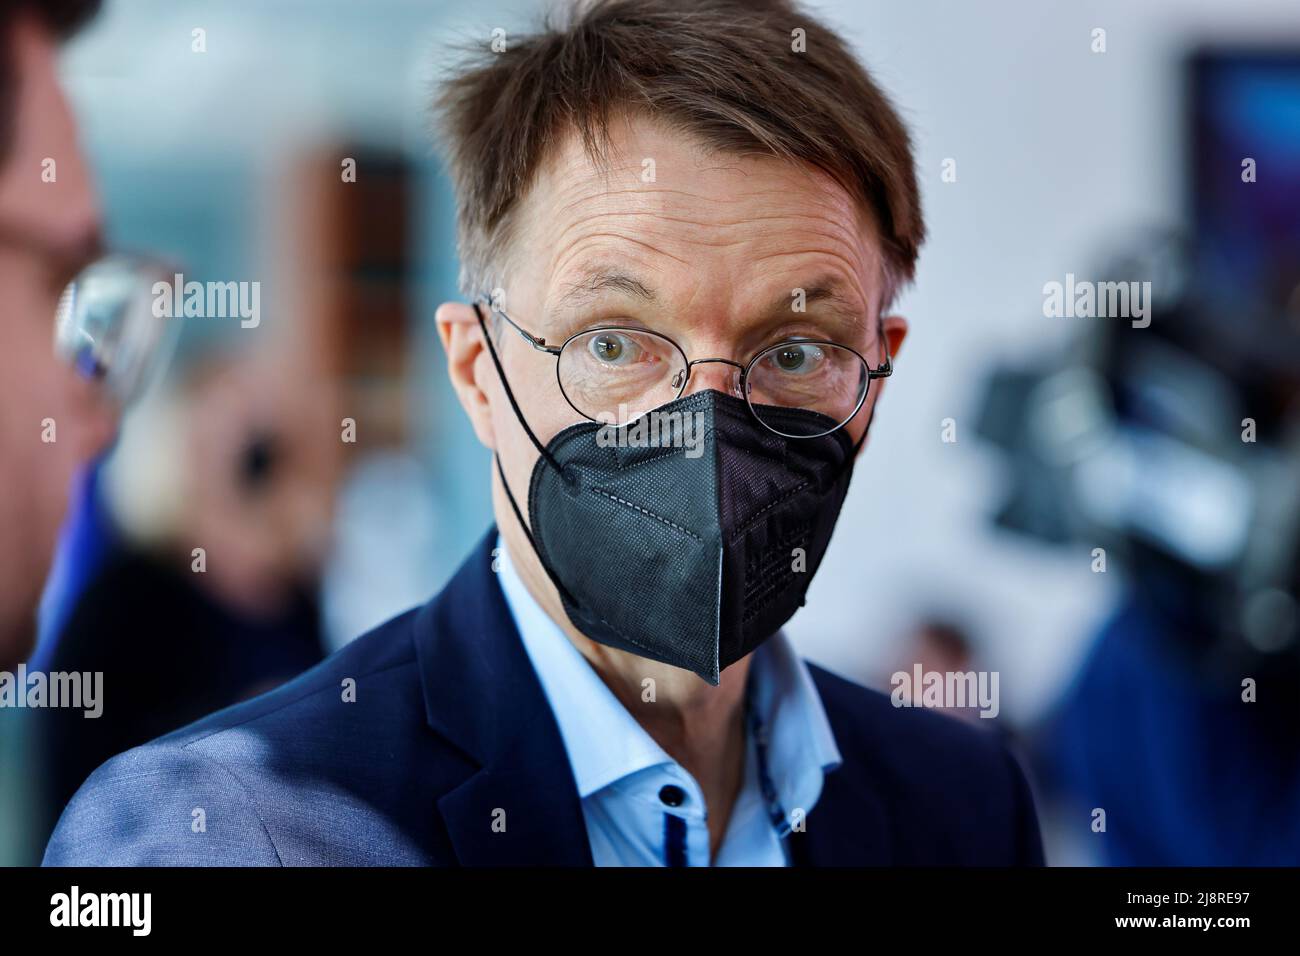 German Health Minister Karl Lauterbach attends the weekly cabinet meeting session in the German Federal Chancellery in Berlin, Germany May 18, 2022. REUTERS/Hannibal Hanschke Stock Photo